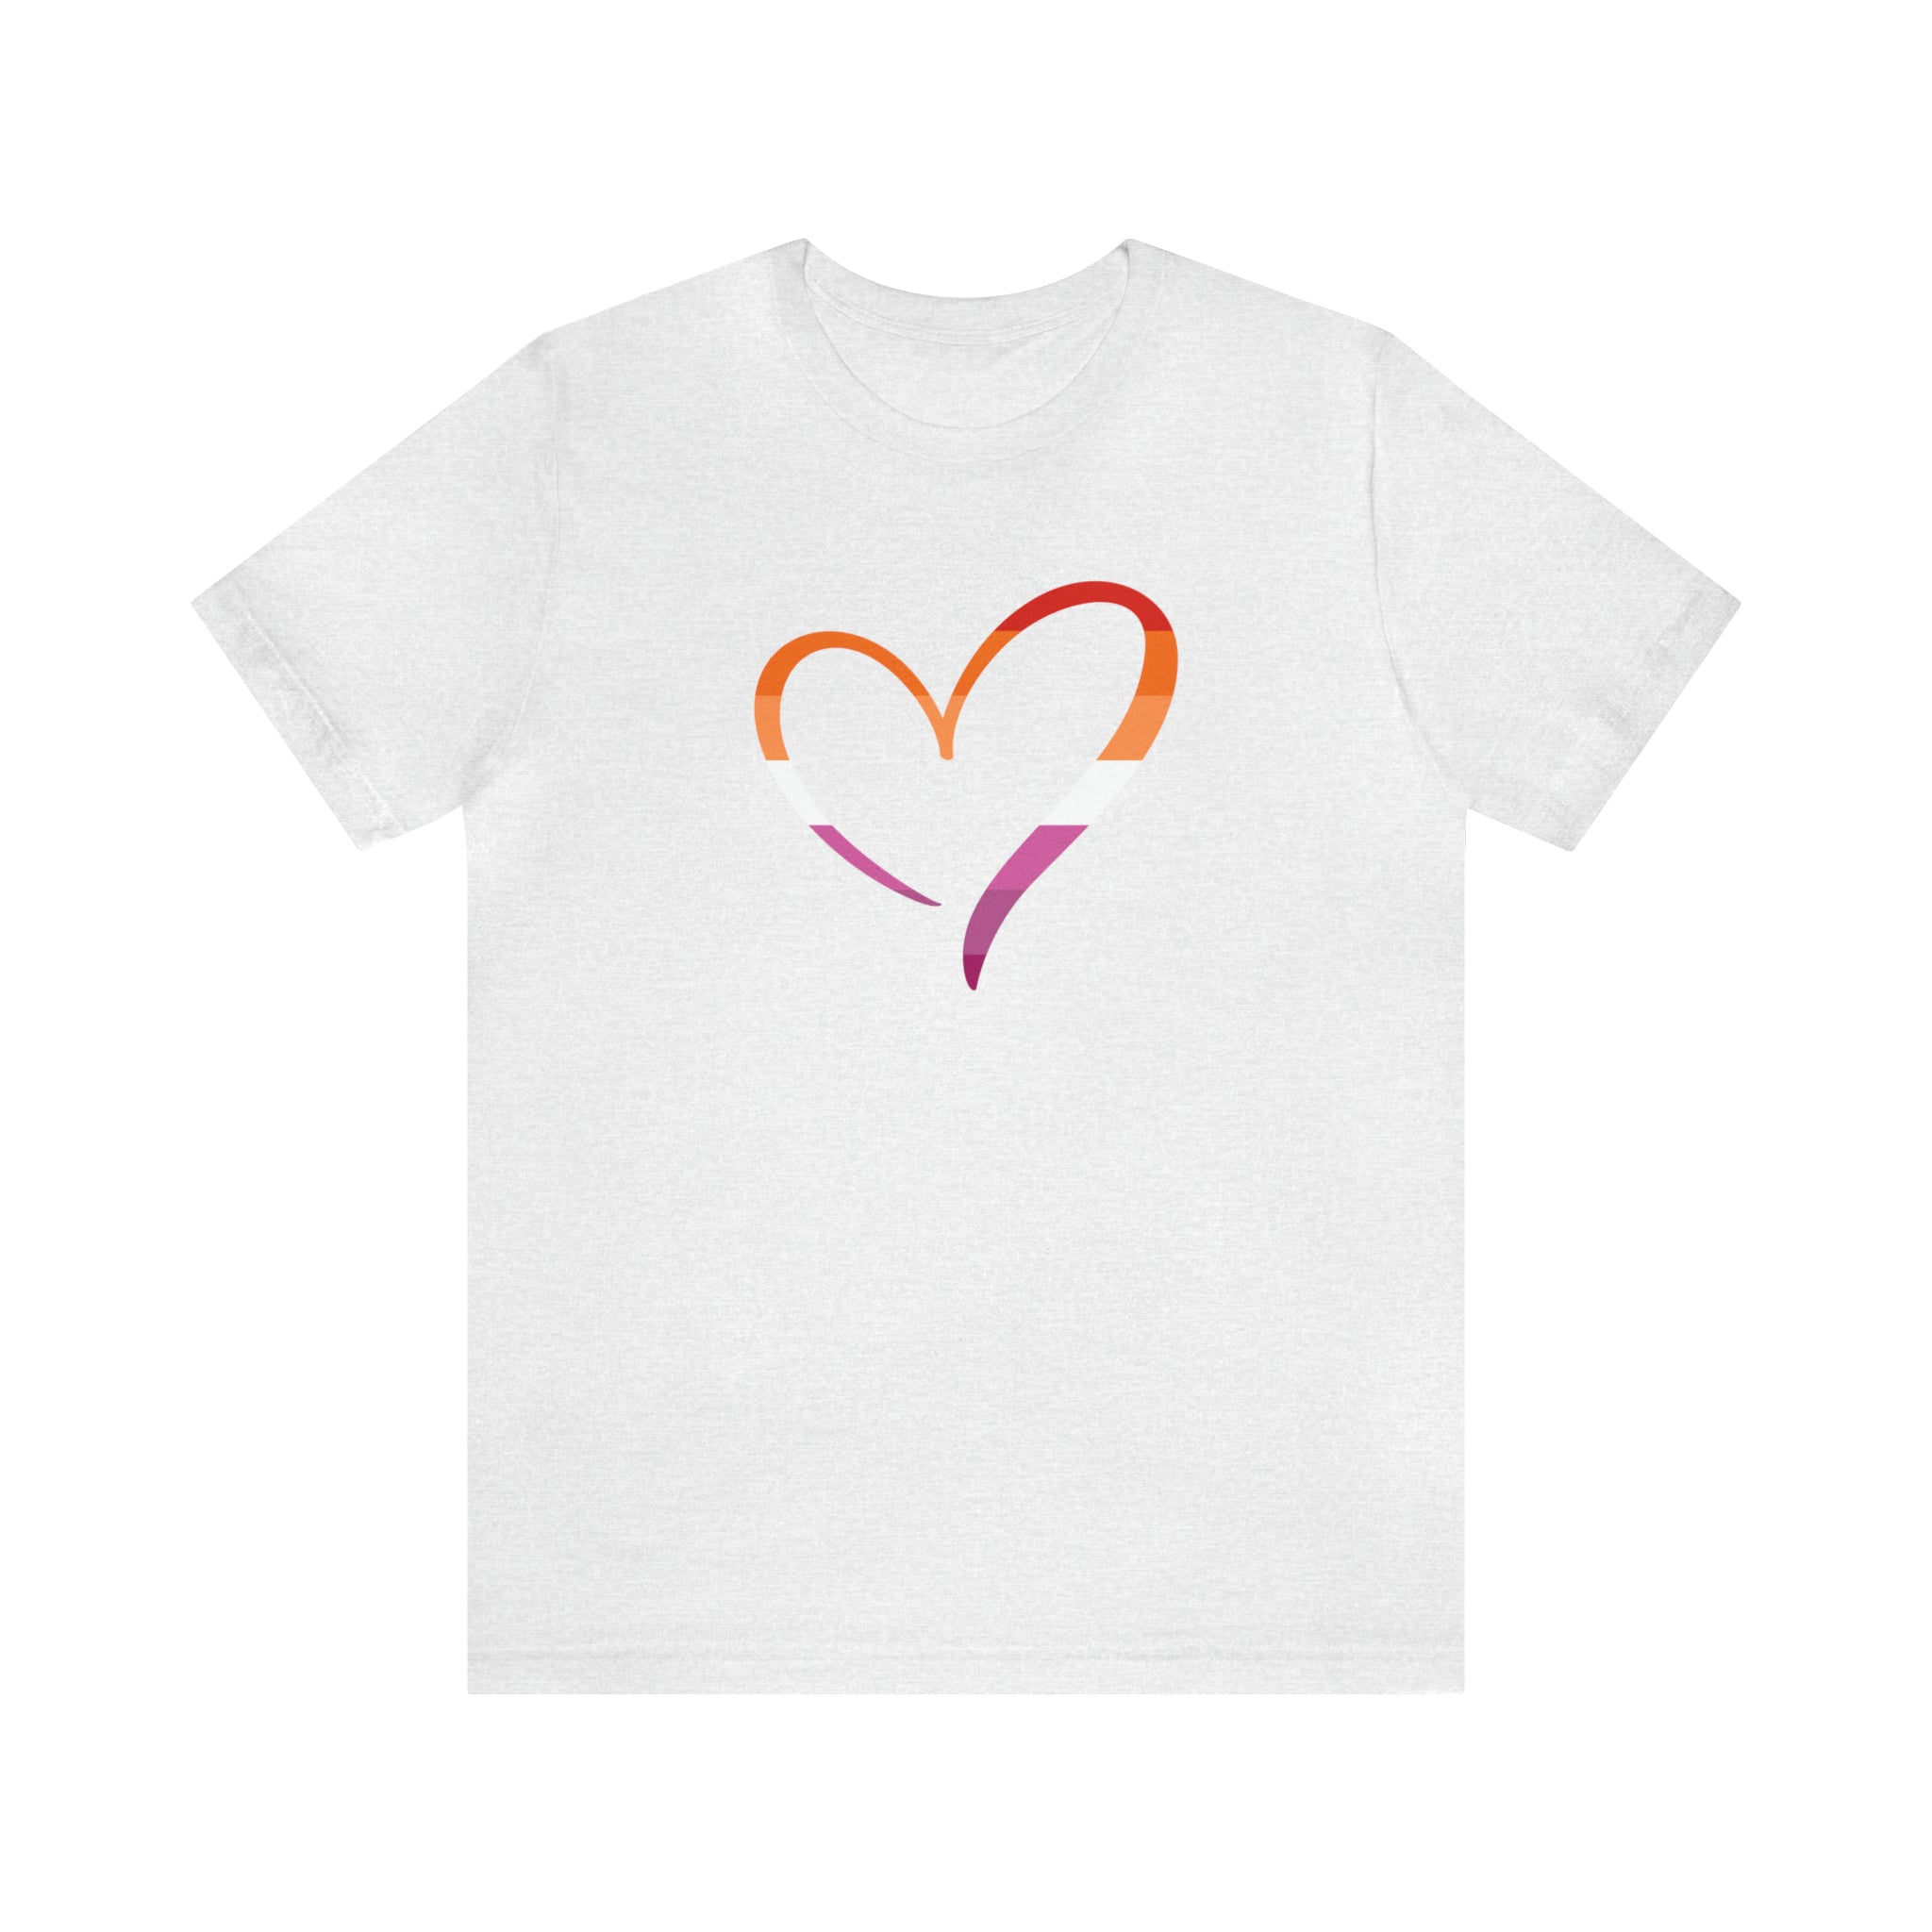 Lesbian Pride Heart Shirt By Wholesome Memes: Unisex 100% Comfy Cotton T-Shirt by Bella+Canvas